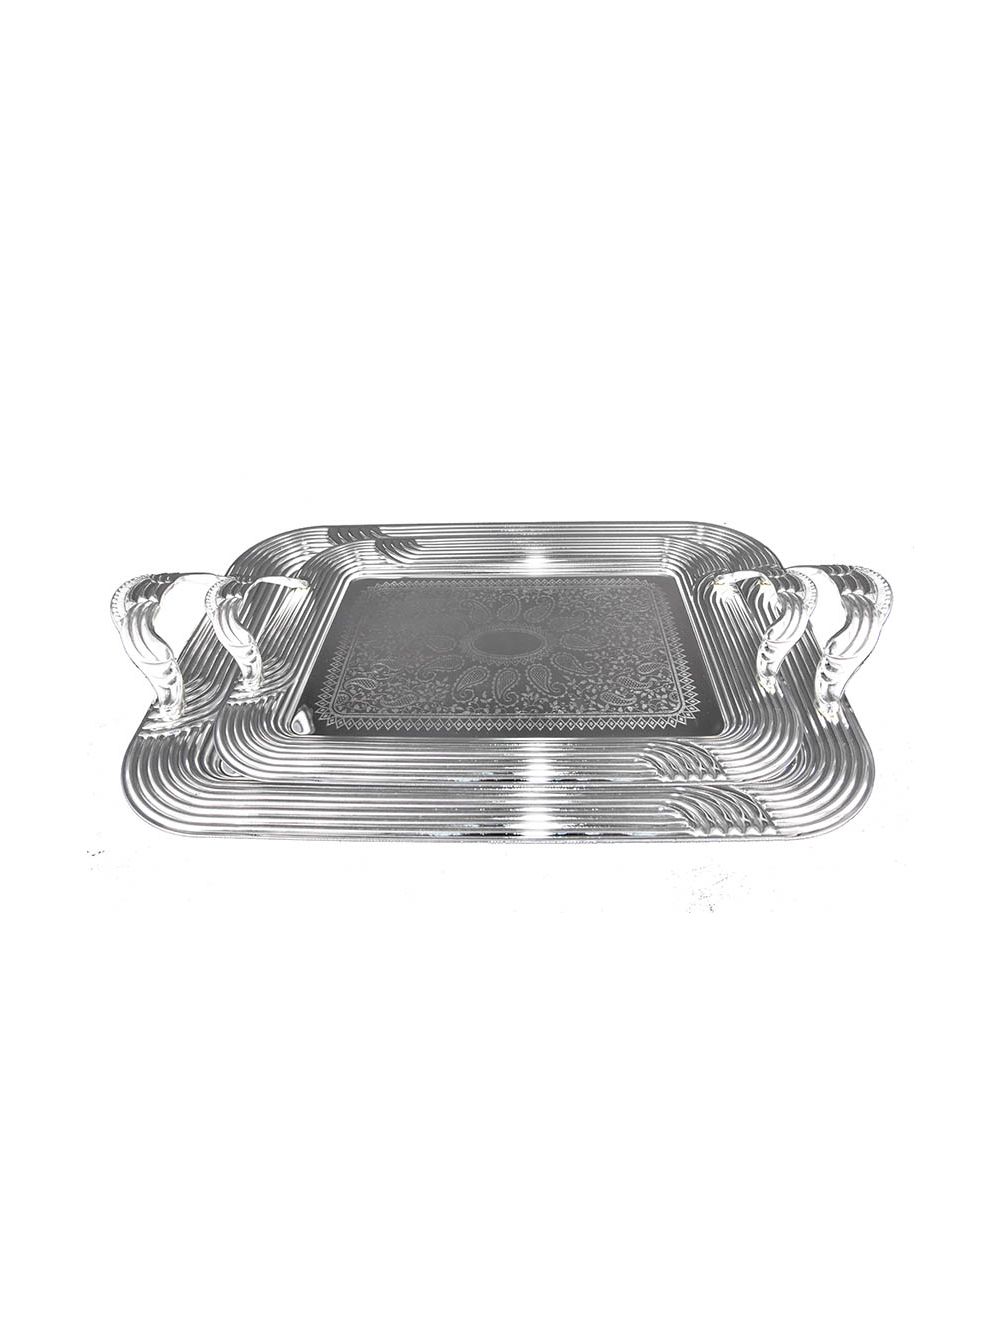 Serving Tray Acrylic Silver Plated Design 